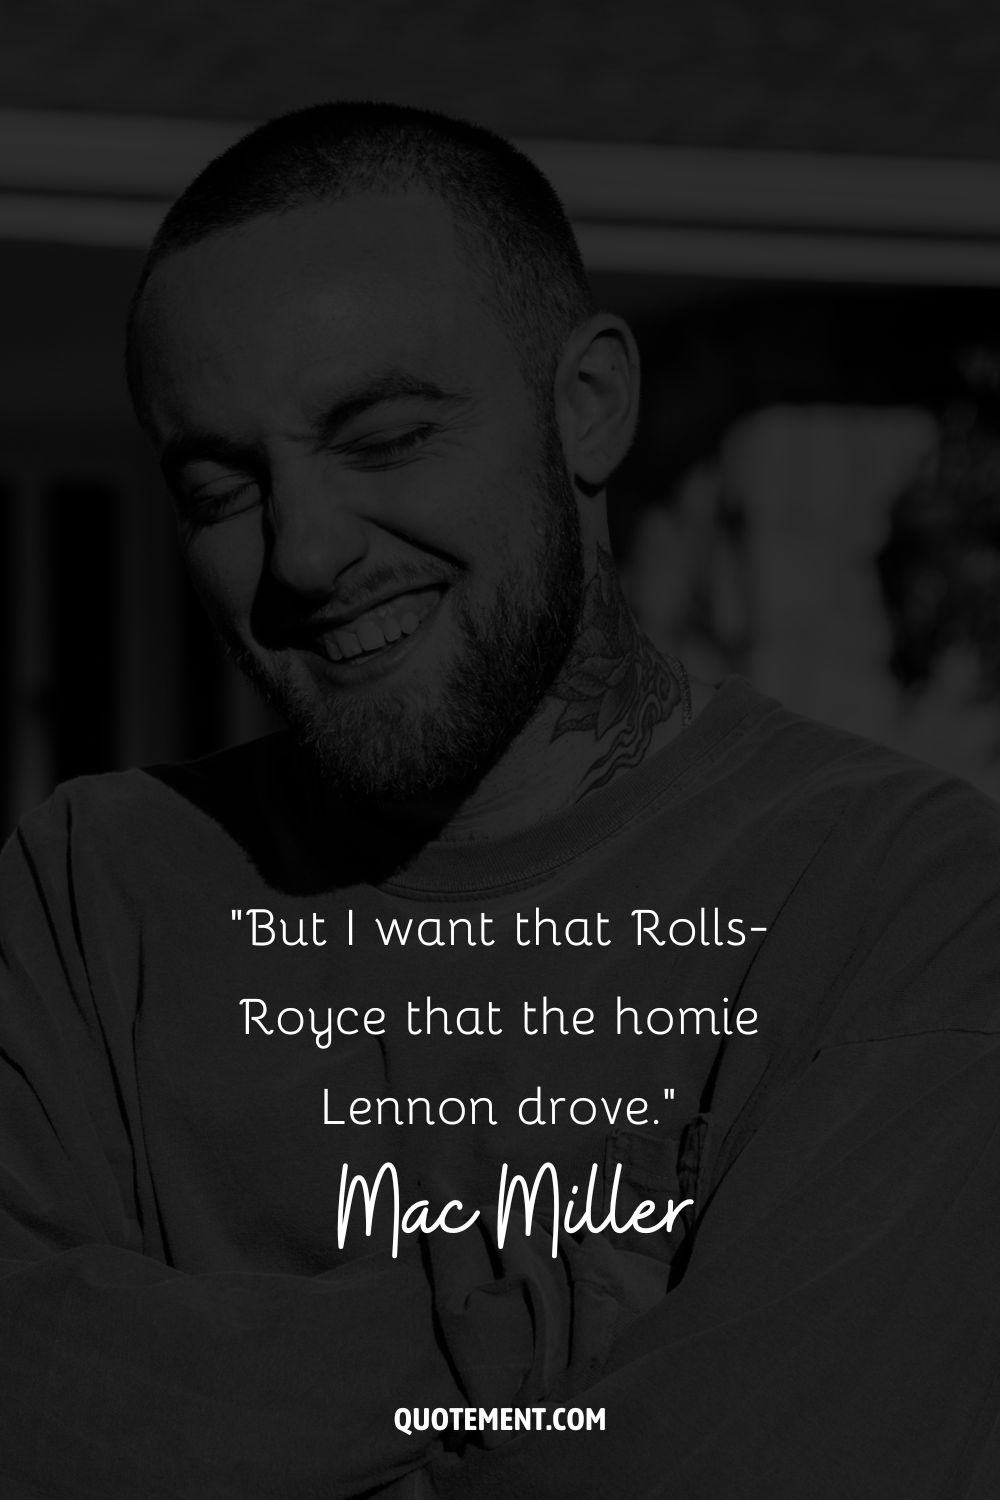 “But I want that Rolls-Royce that the homie Lennon drove.” – Mac Miller